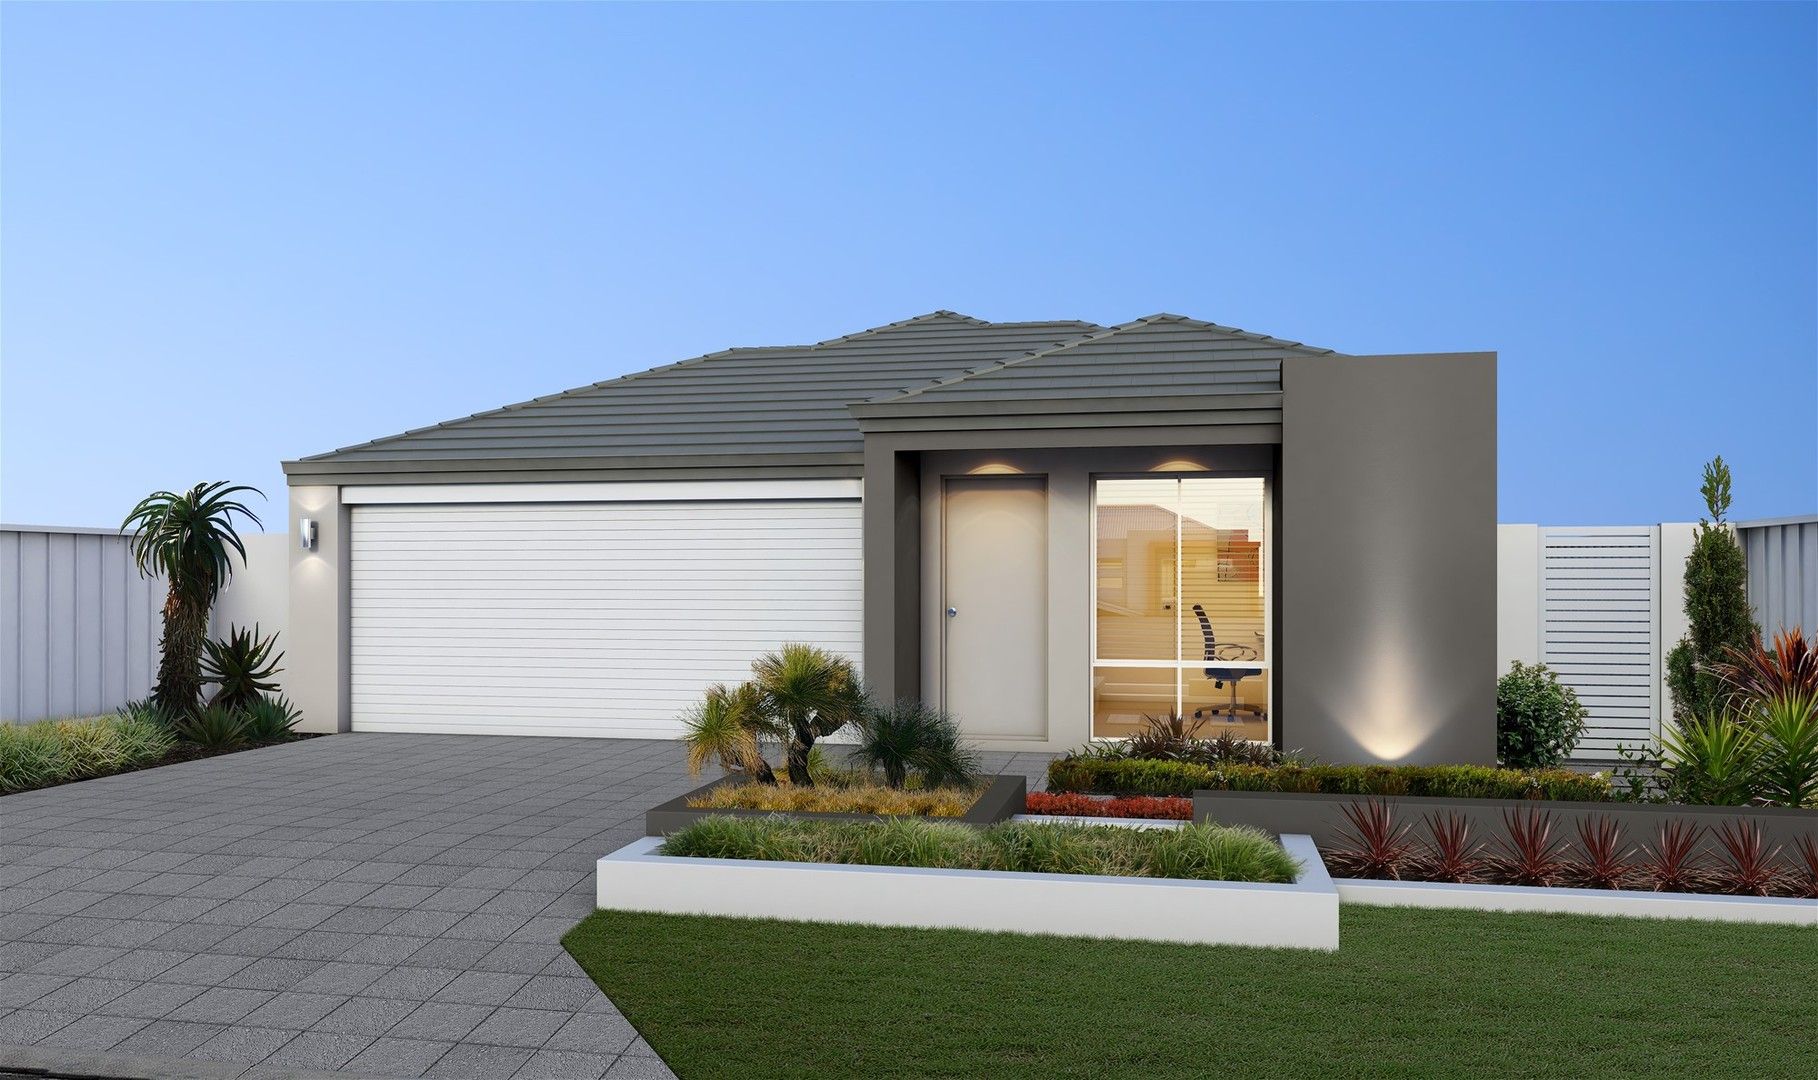 4 bedrooms New House & Land in Lot 11 116 Astley Street GOSNELLS WA, 6110